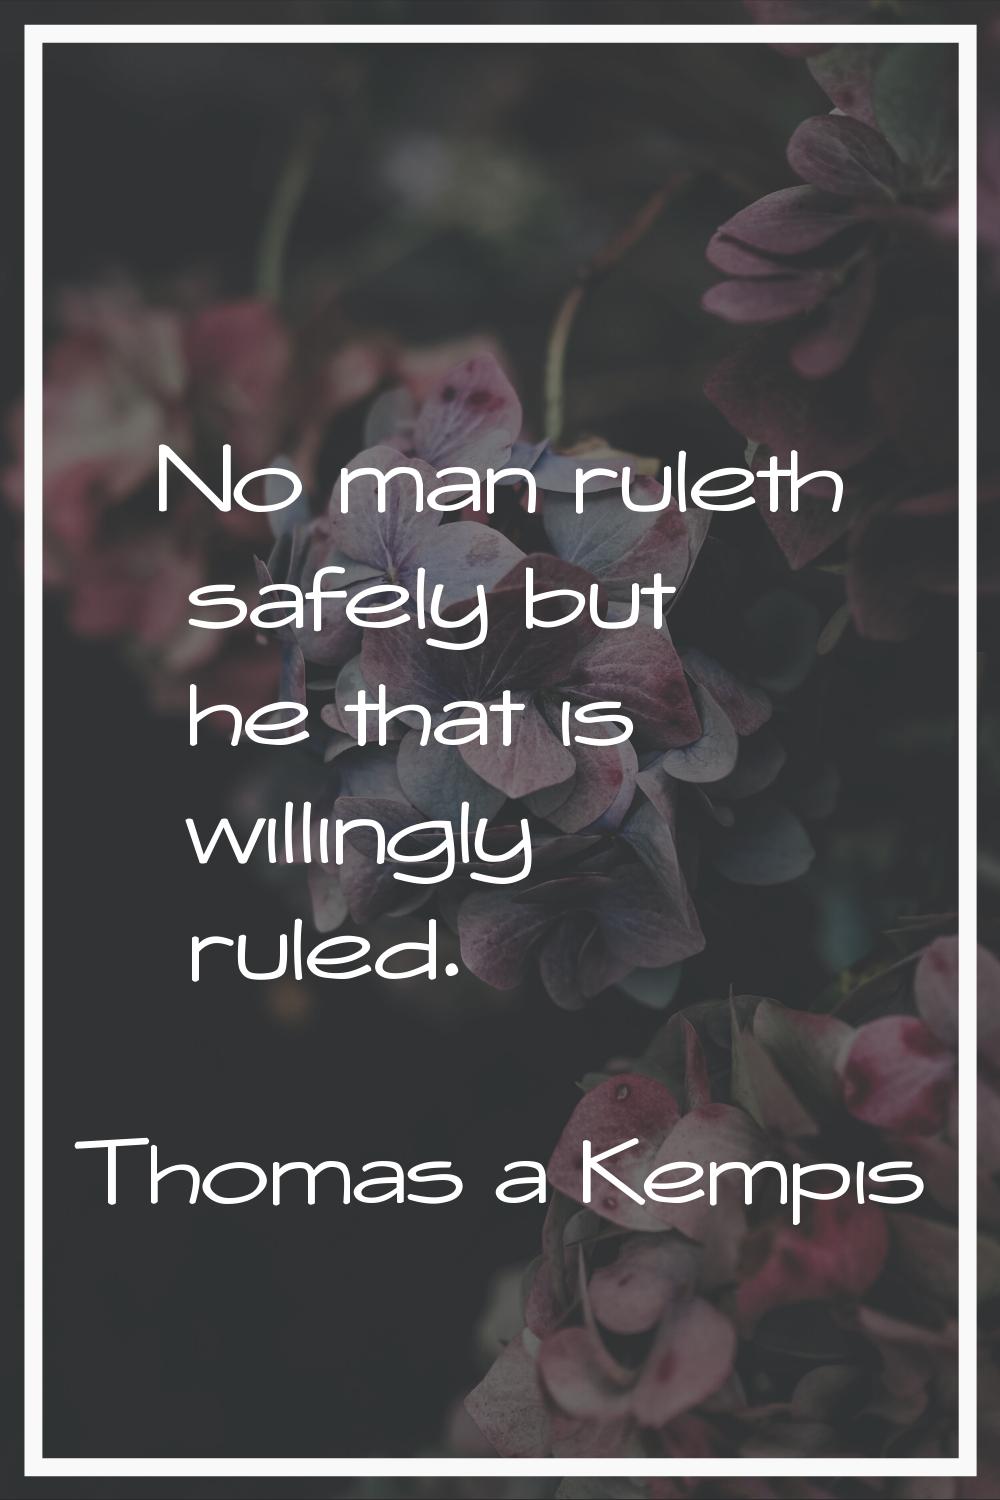 No man ruleth safely but he that is willingly ruled.